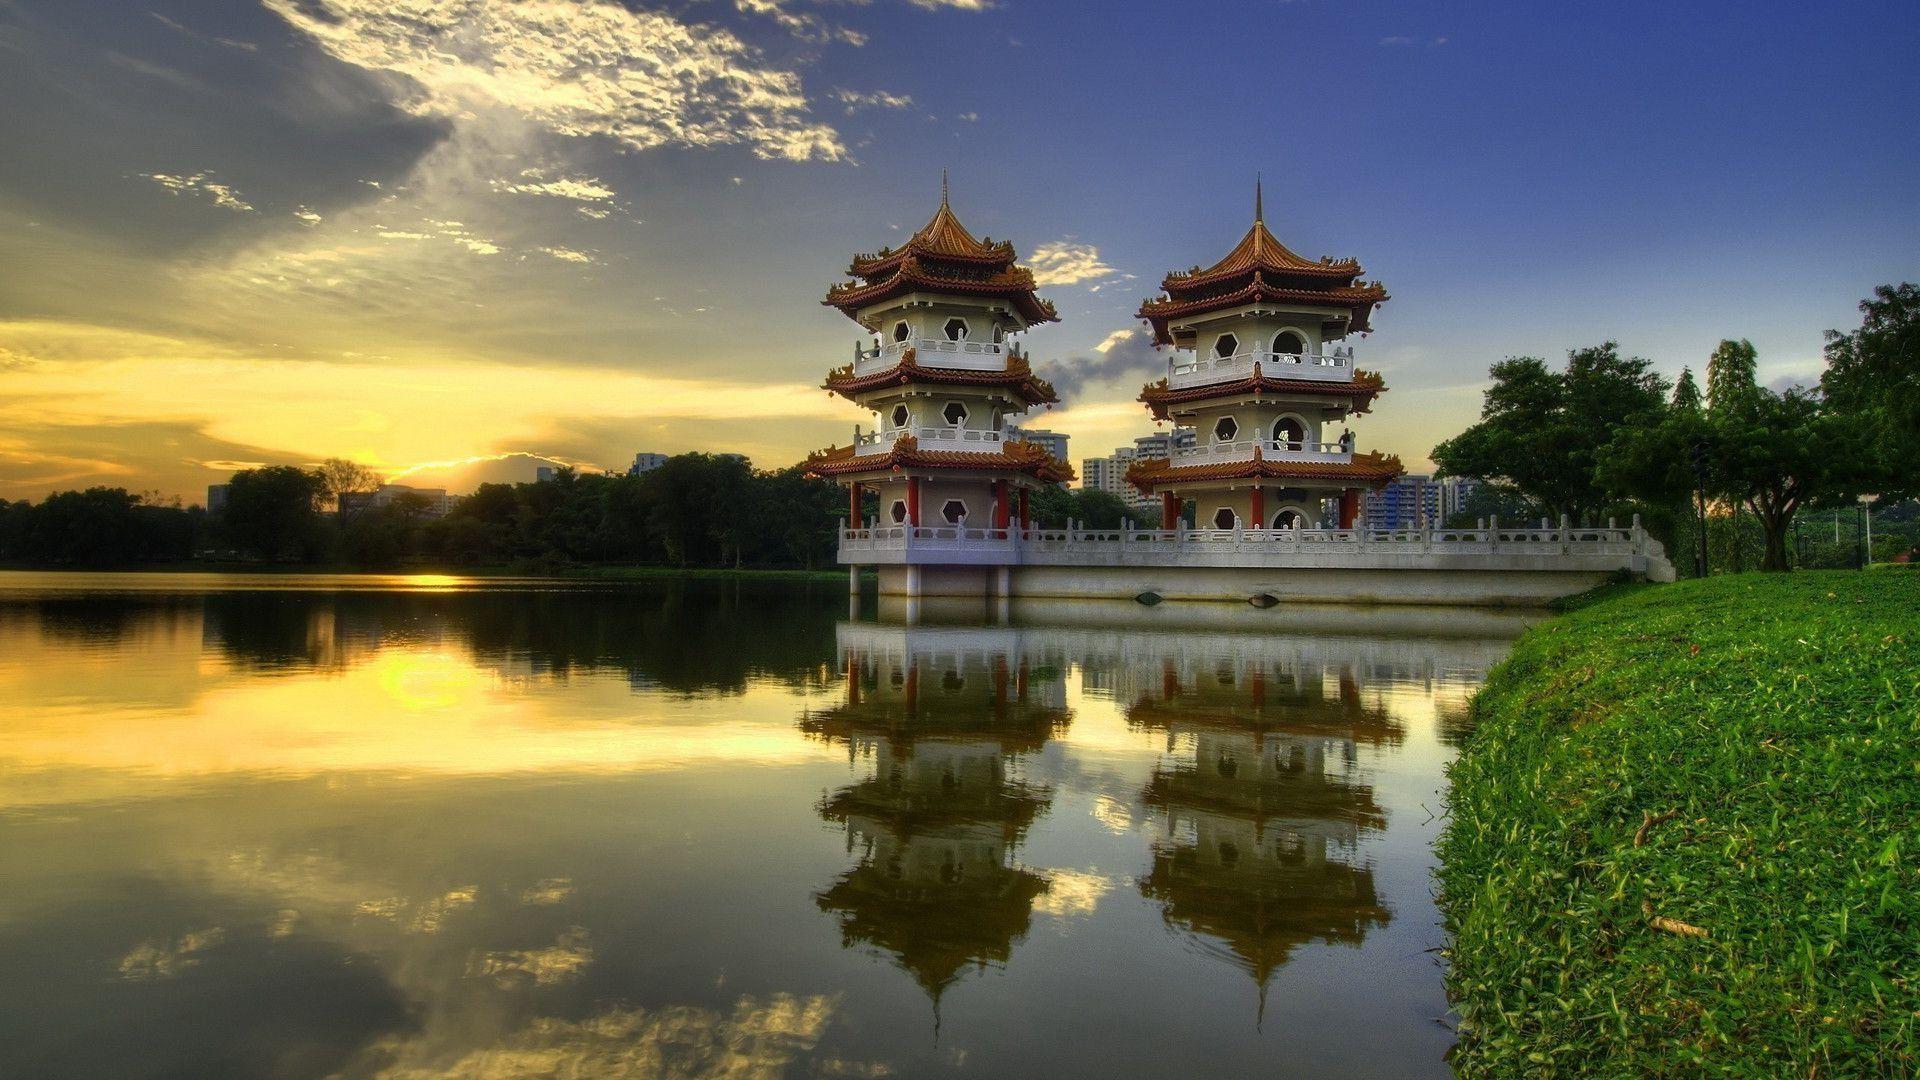 Chinese Pagoda Wallpapers - Top Free Chinese Pagoda Backgrounds ...